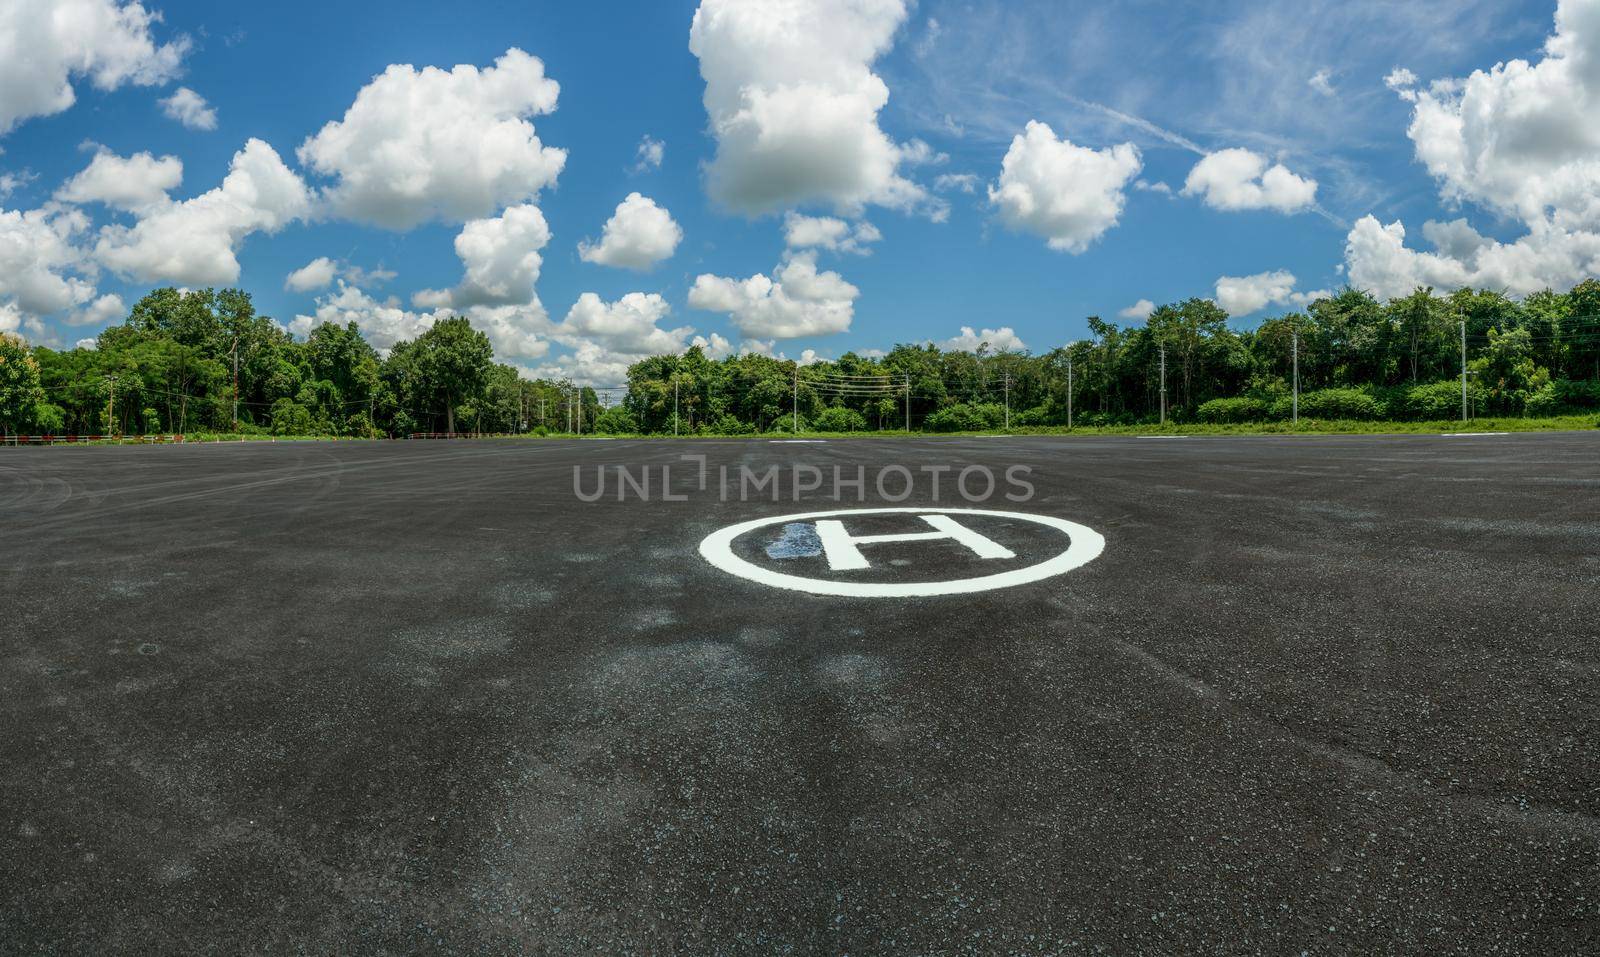 Asphalt helipad in the forest. Landscape of helipad. Helipad area against blue sky and white cumulus clouds in sunny day. Platform for helicopters and powered lift aircraft. Heliport of helicopter.